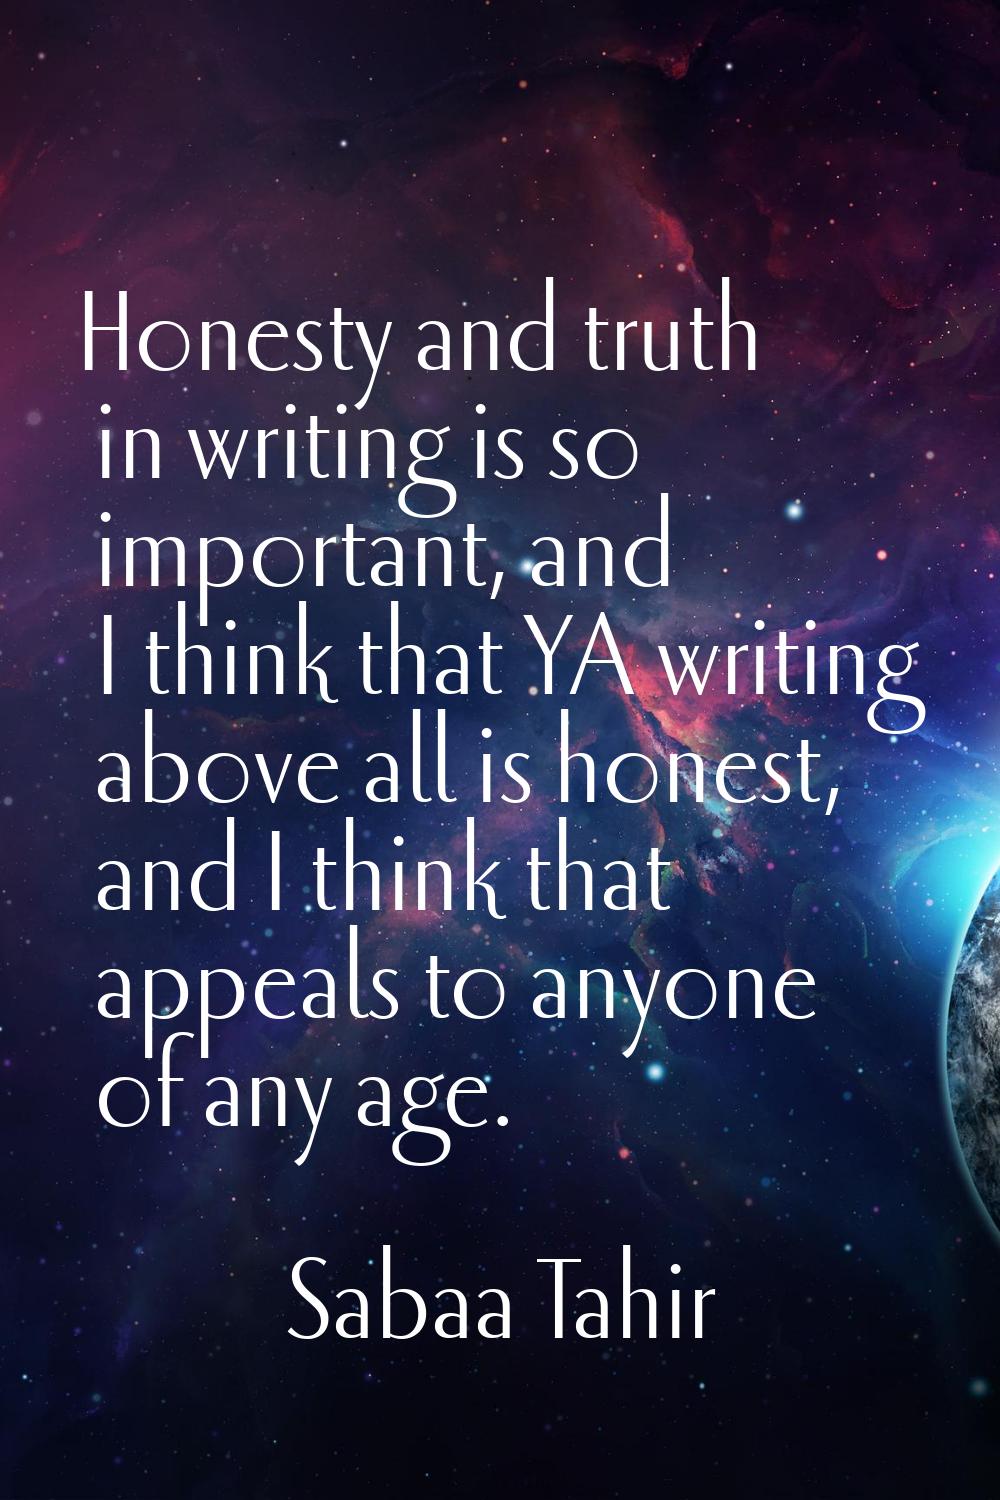 Honesty and truth in writing is so important, and I think that YA writing above all is honest, and 